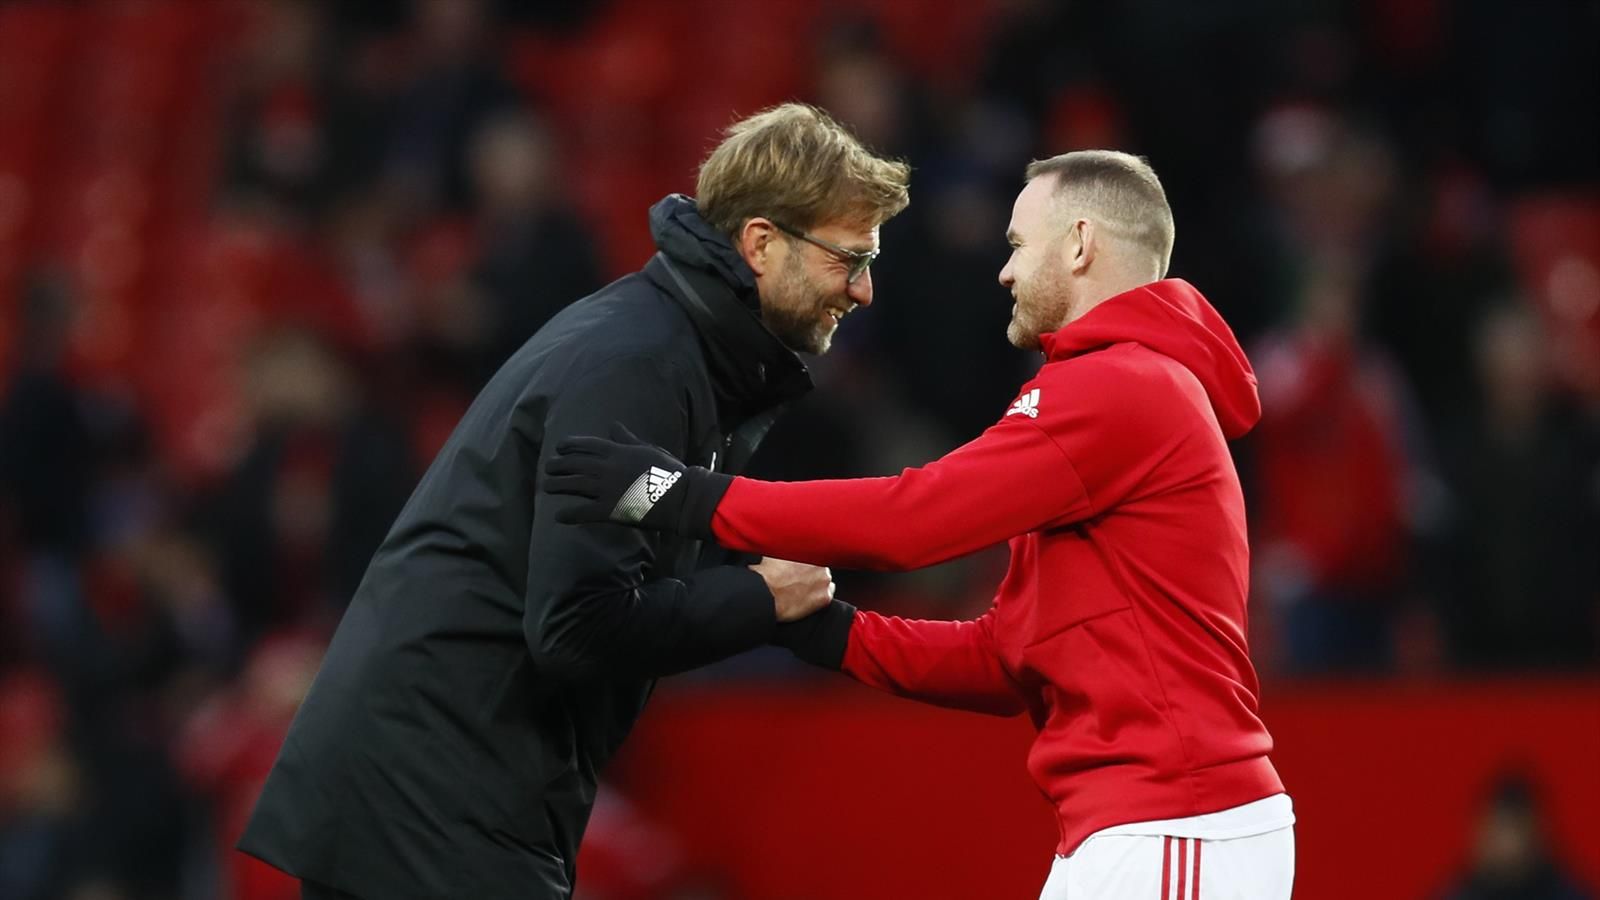 Rooney: Only bad thing about Klopp is working for Liverpool!